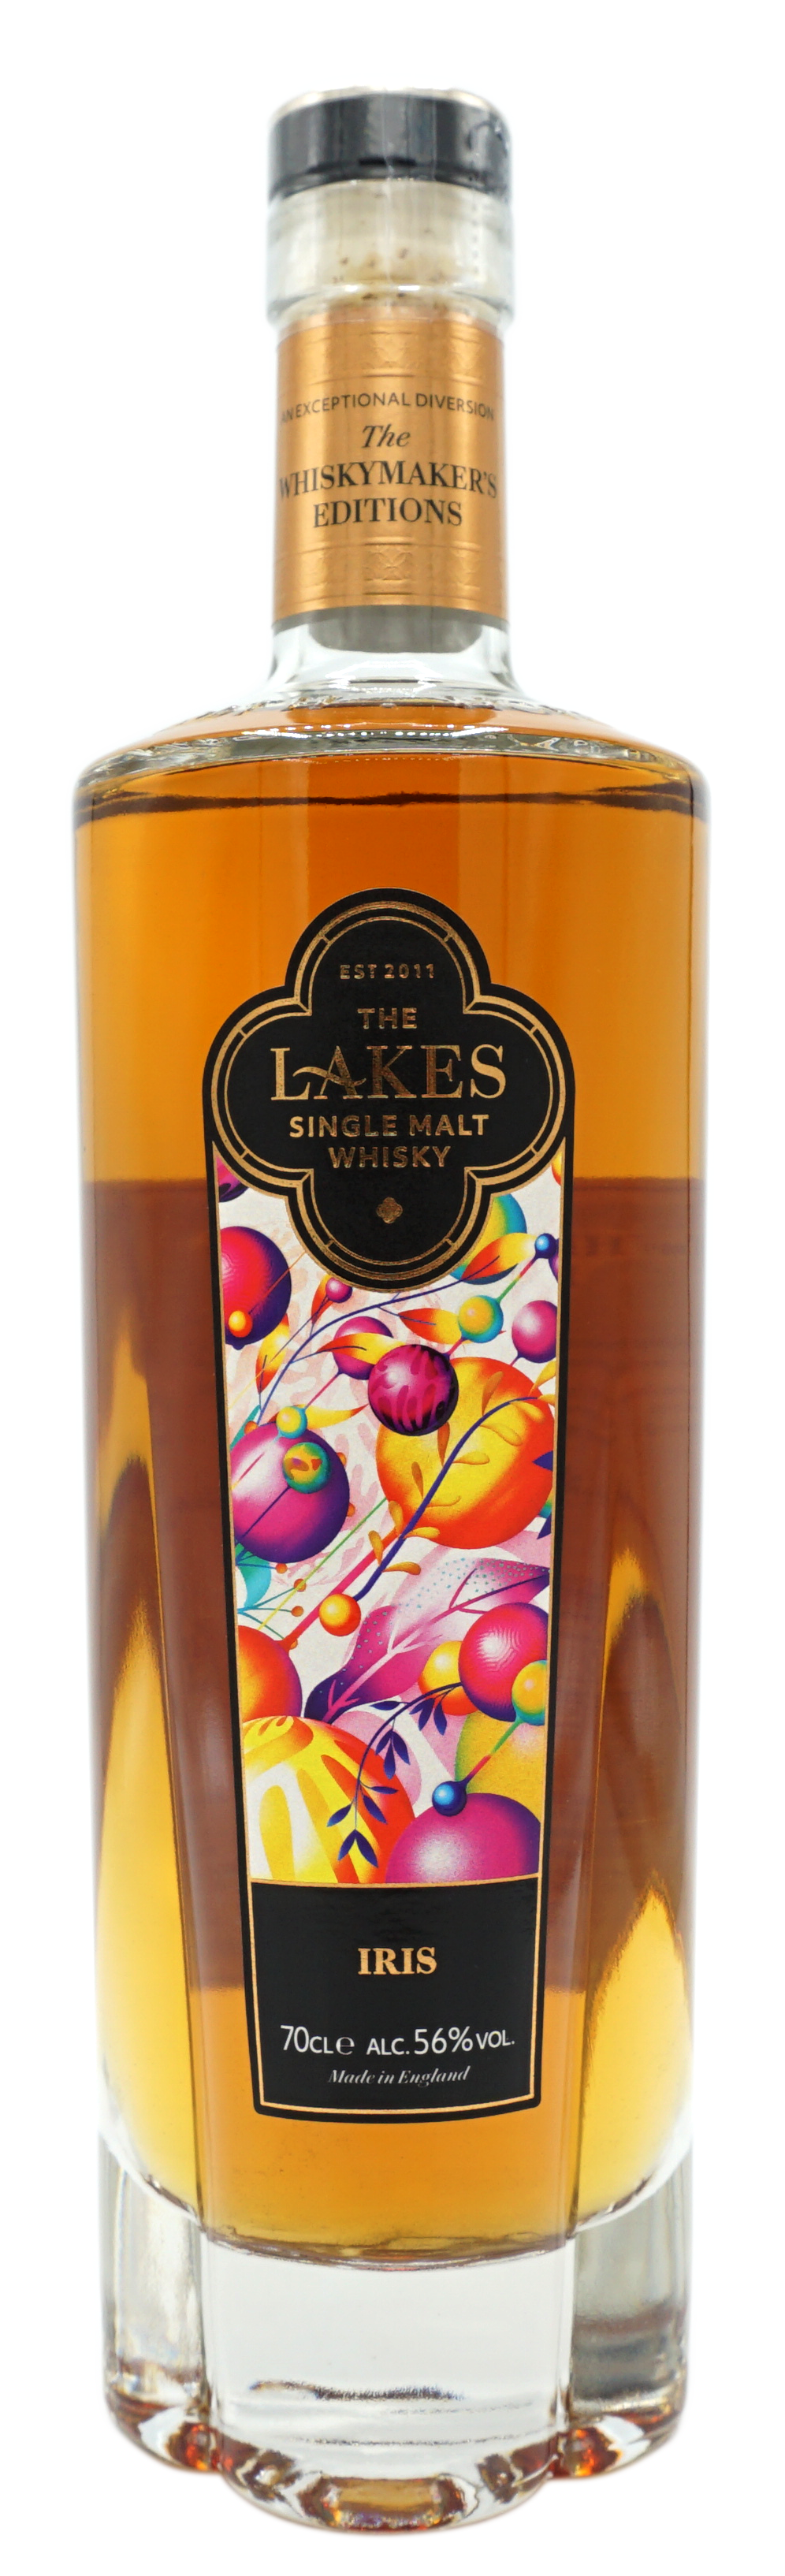 TheLakes TheWhiskymaker’sEditions Iris 56% Fles